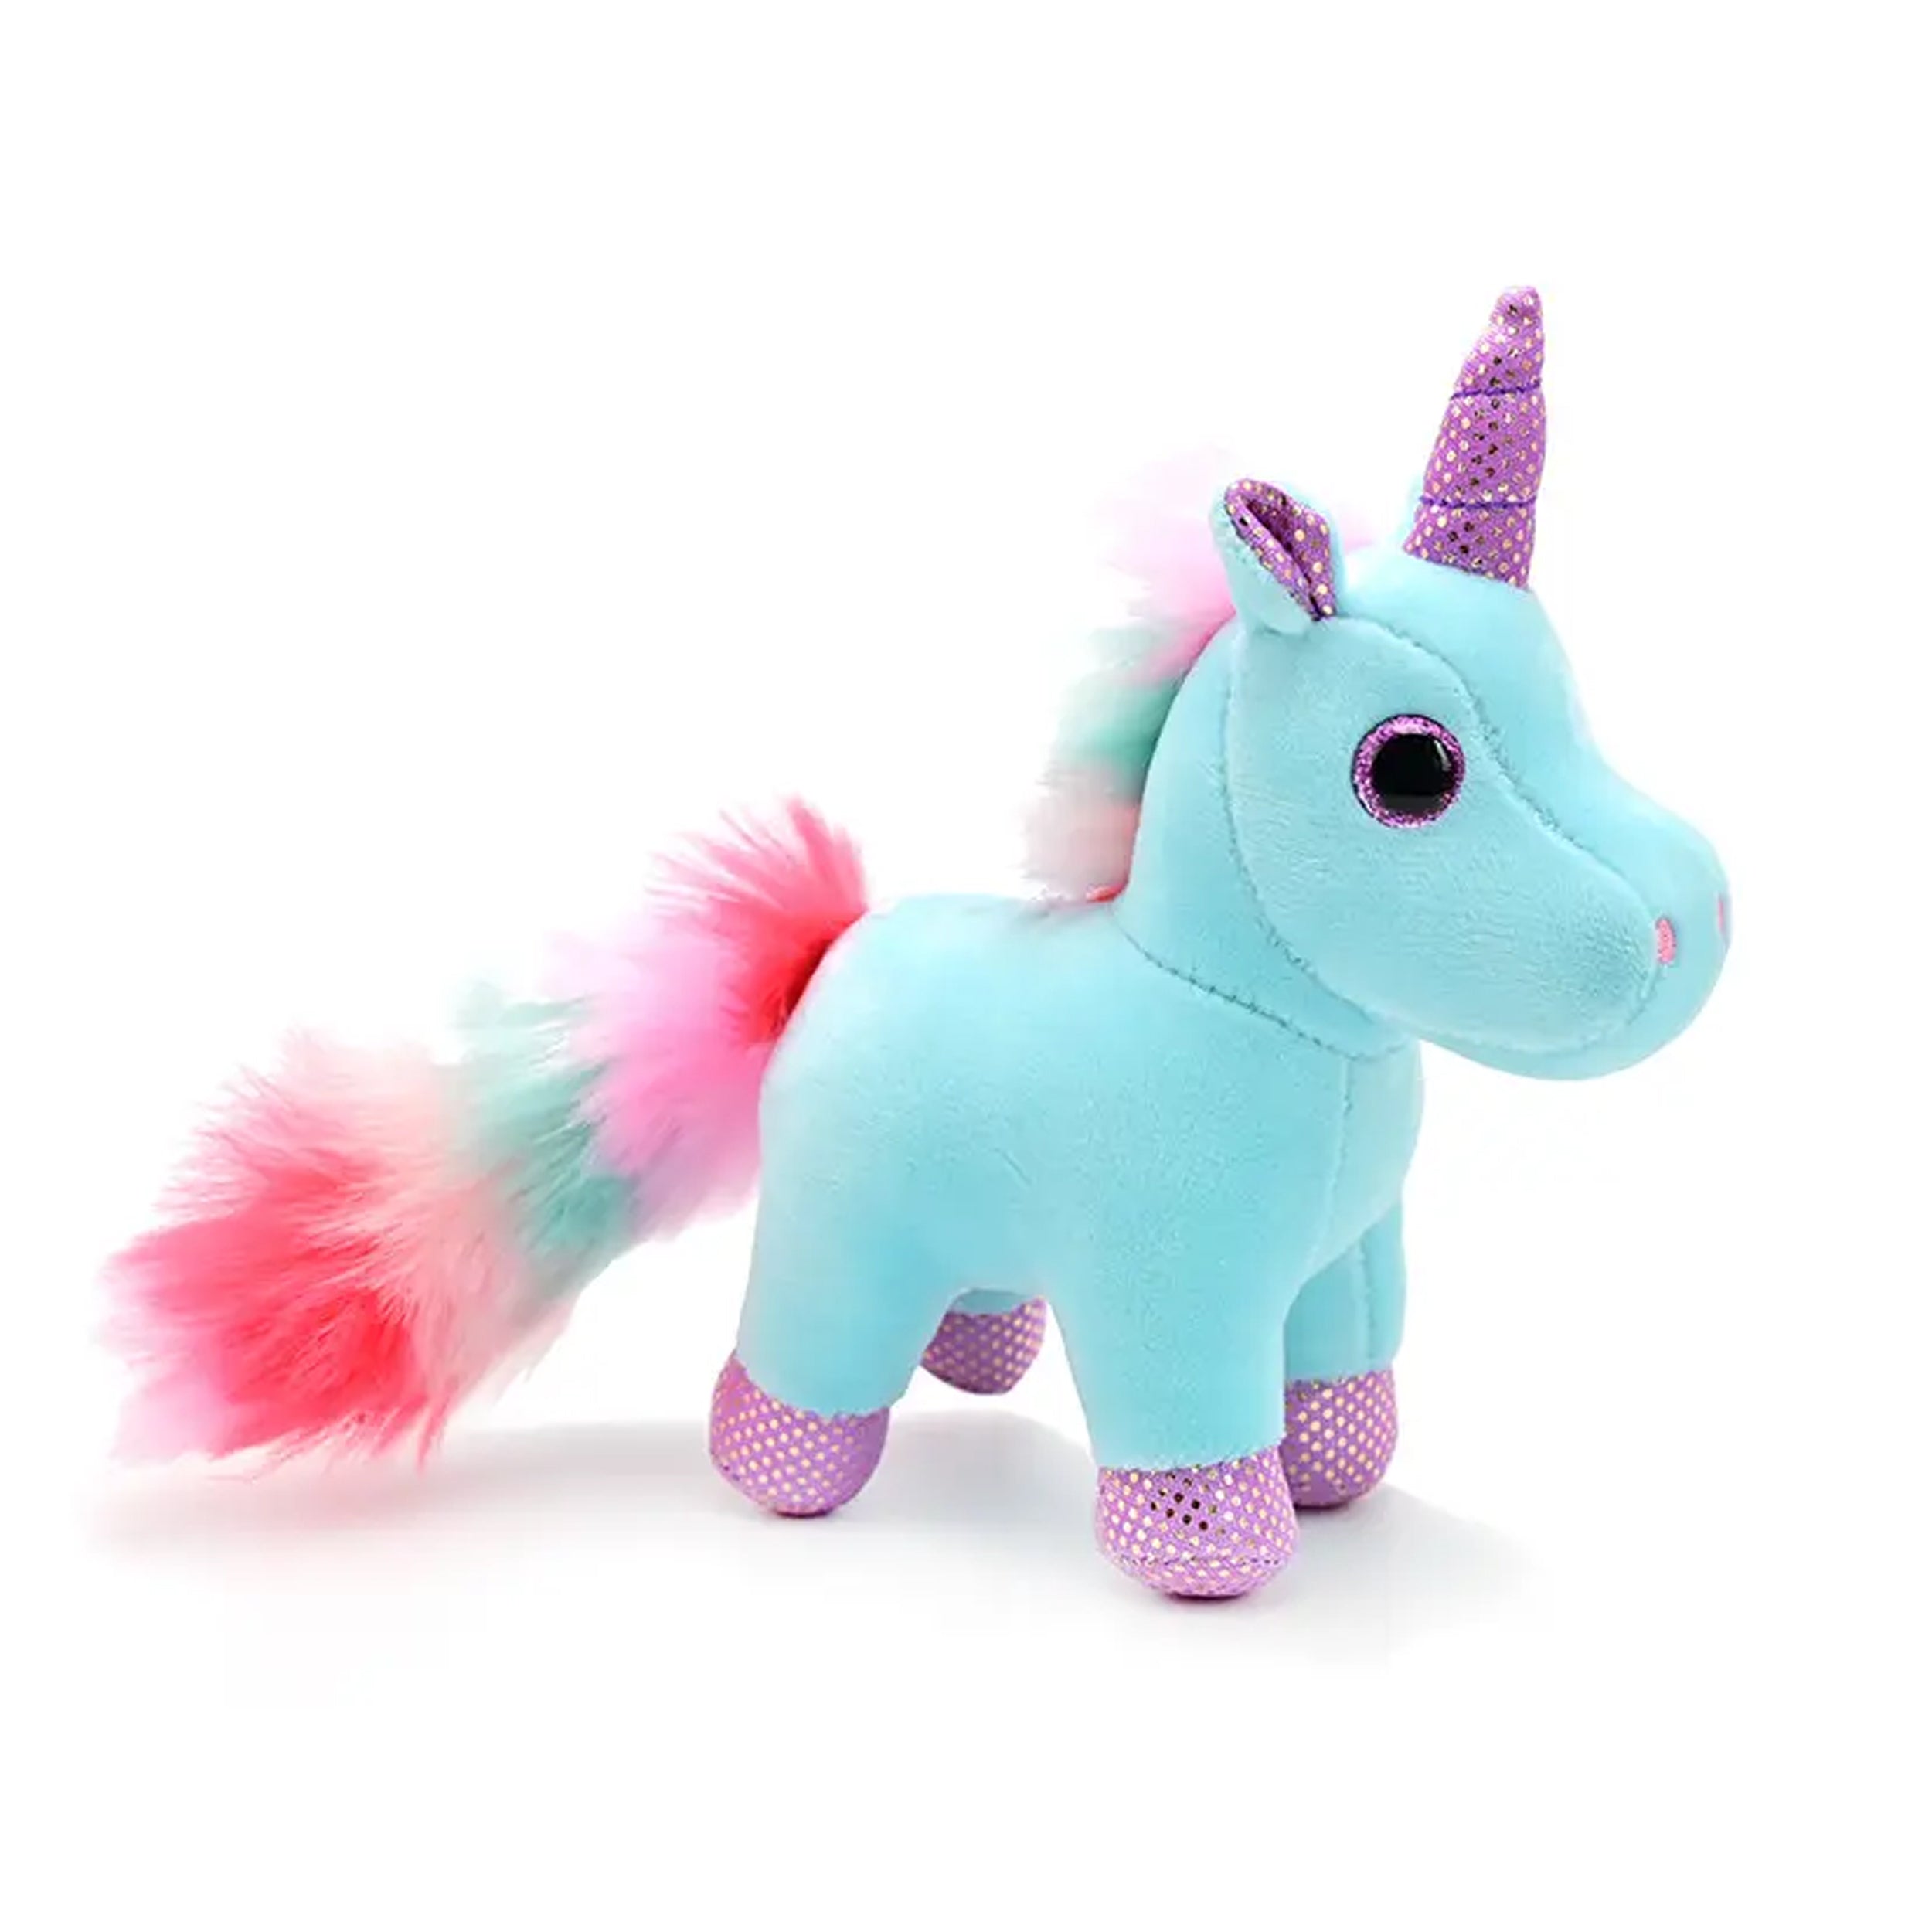 Unicorn Long Tail Soft Plush Keychain - Assorted Colors and Designs for the Perfect Accessory